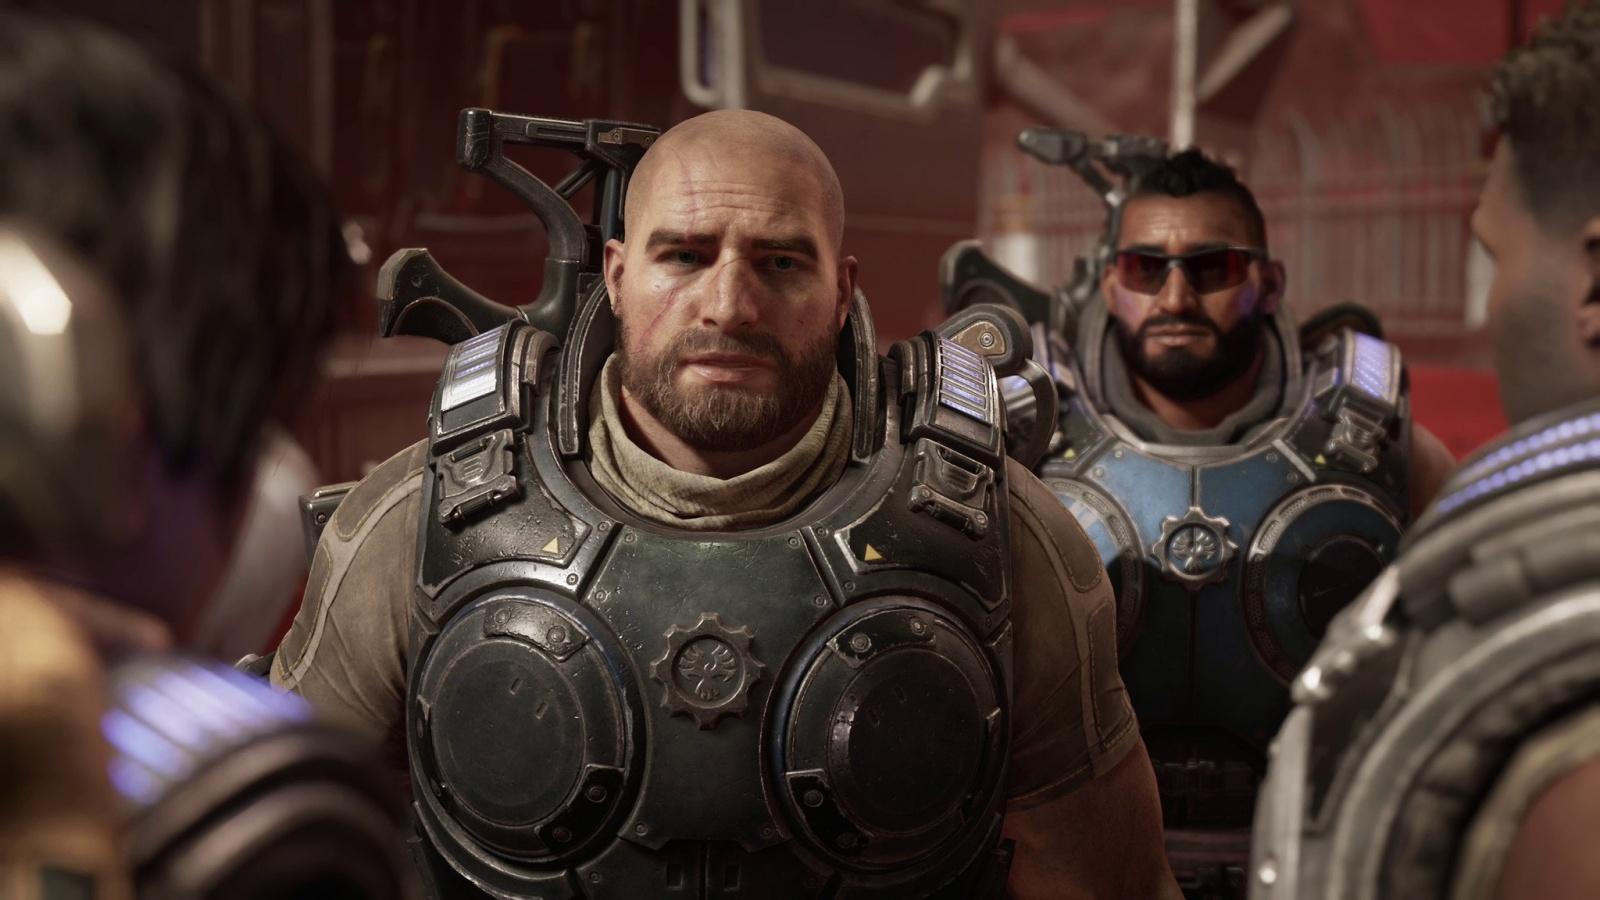 Next Gears of War game in the works according to new job listings